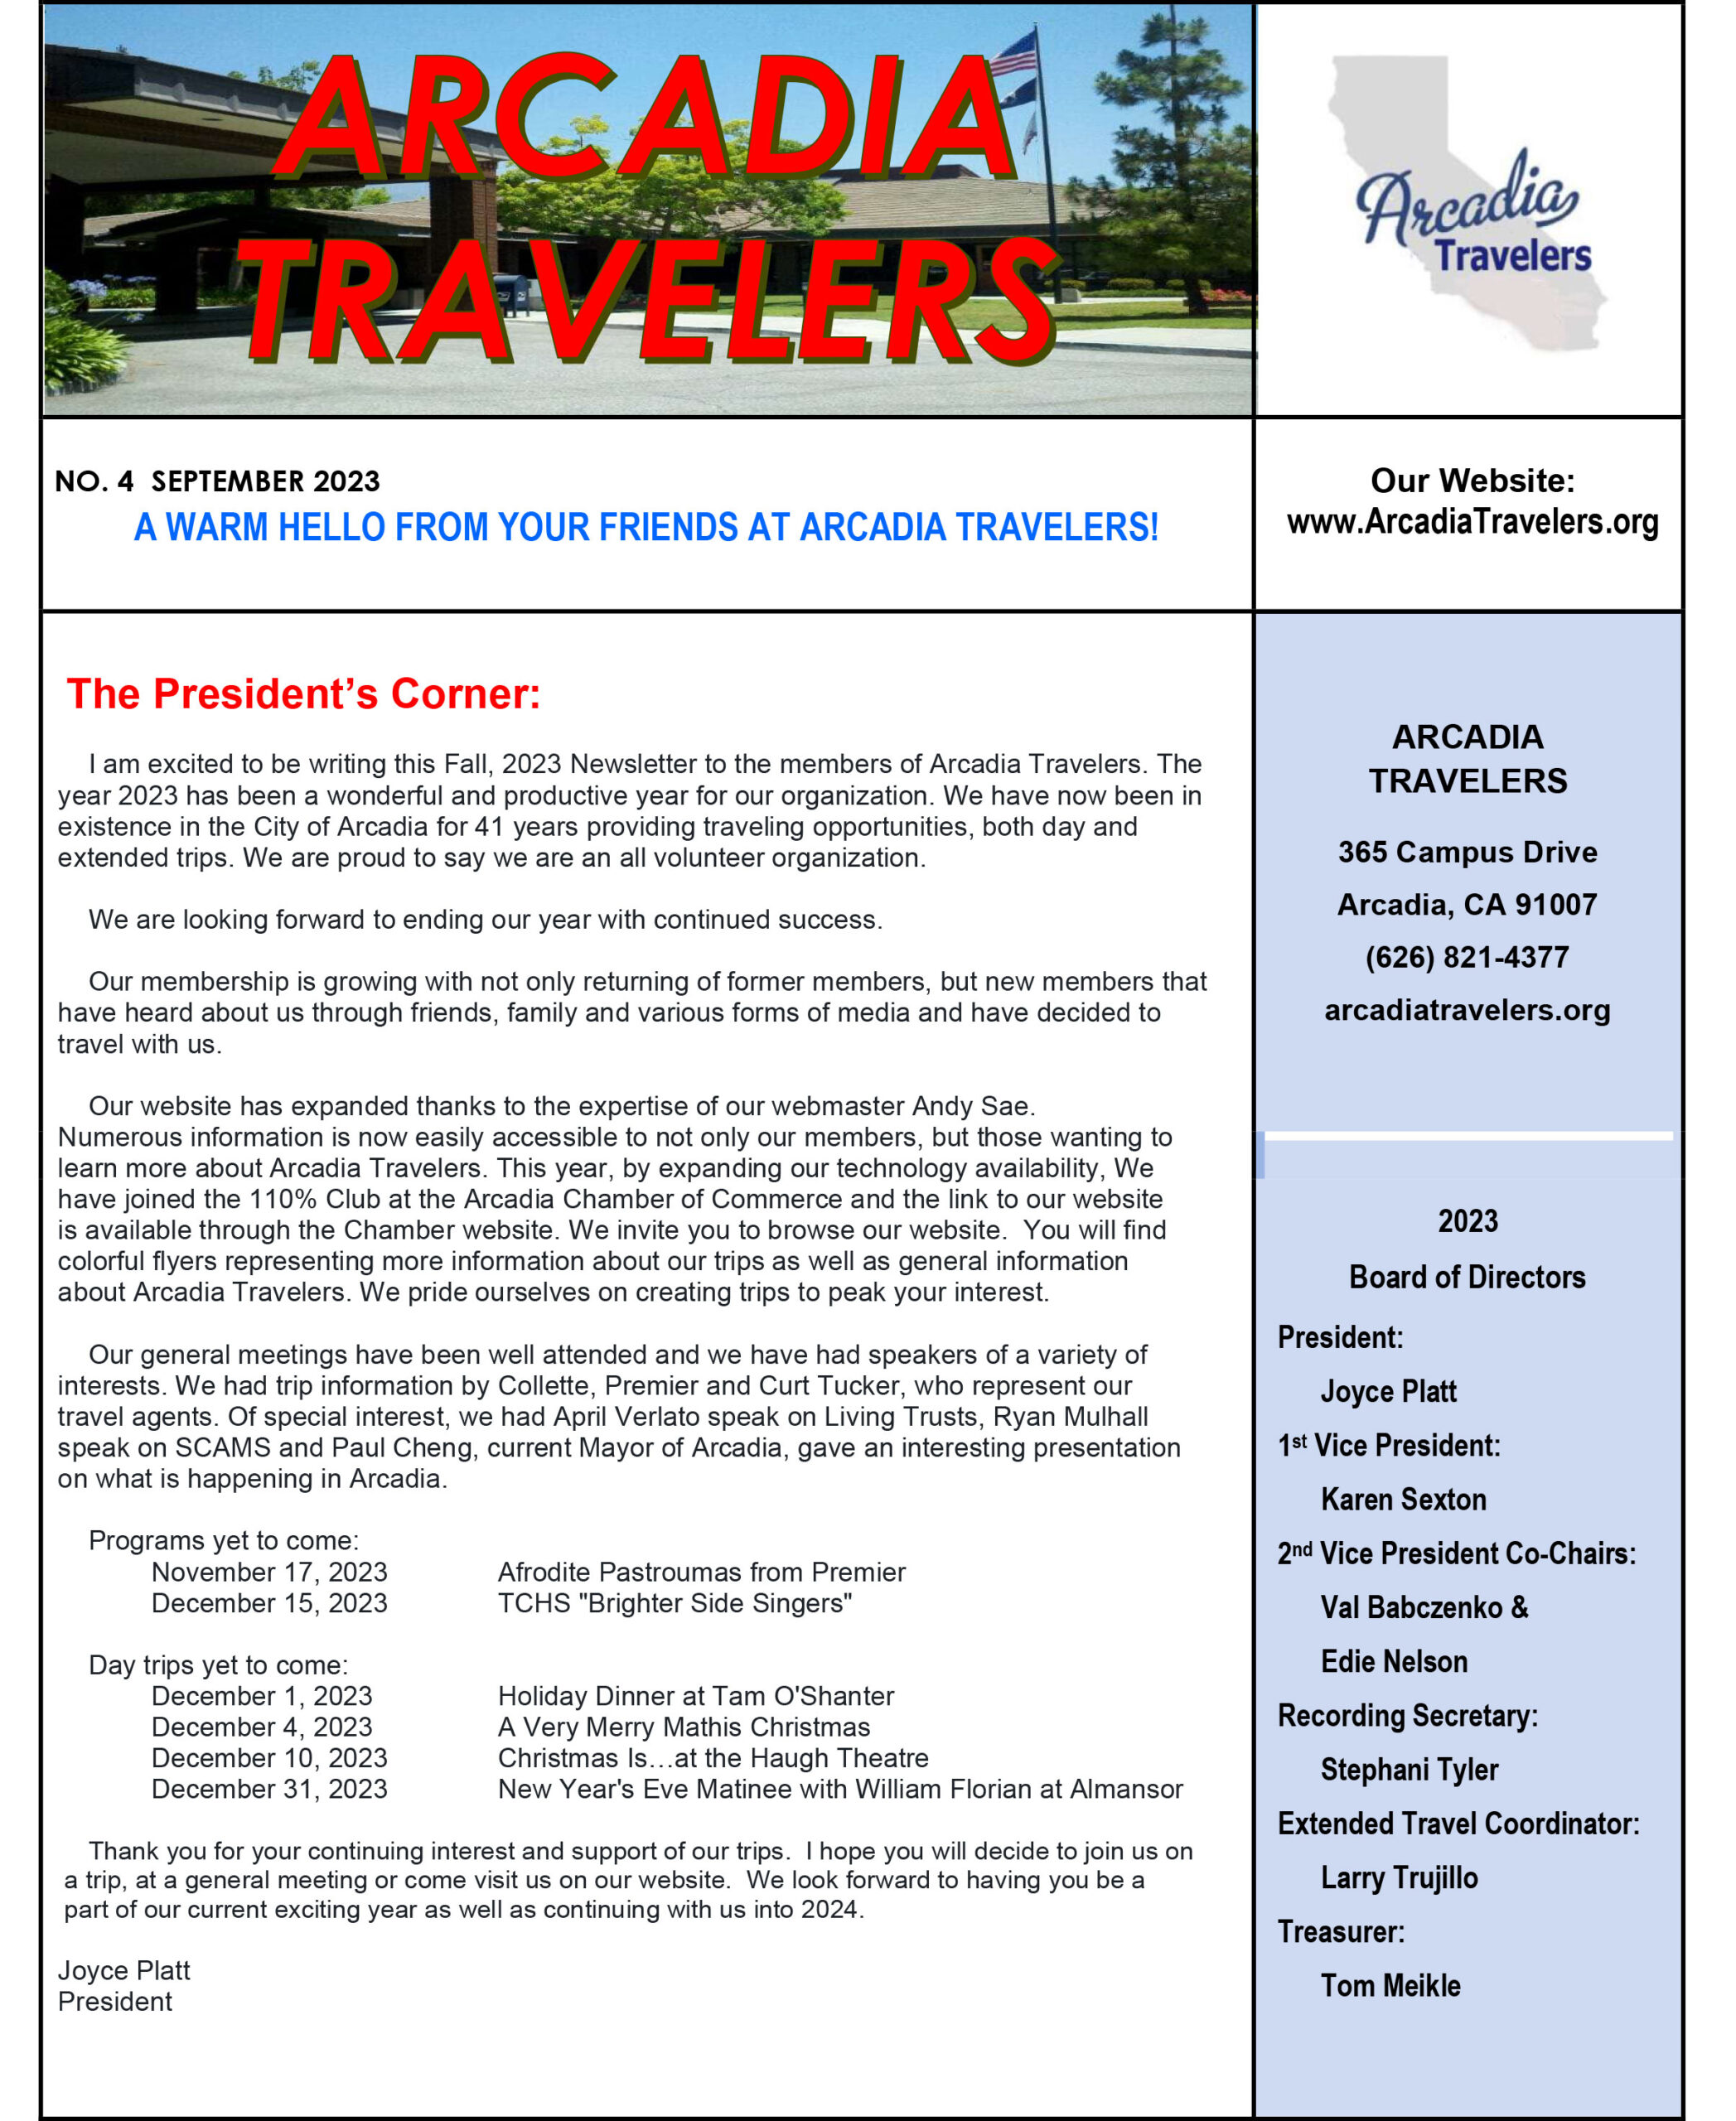 Arcadia Travelers day trips for end of 2023